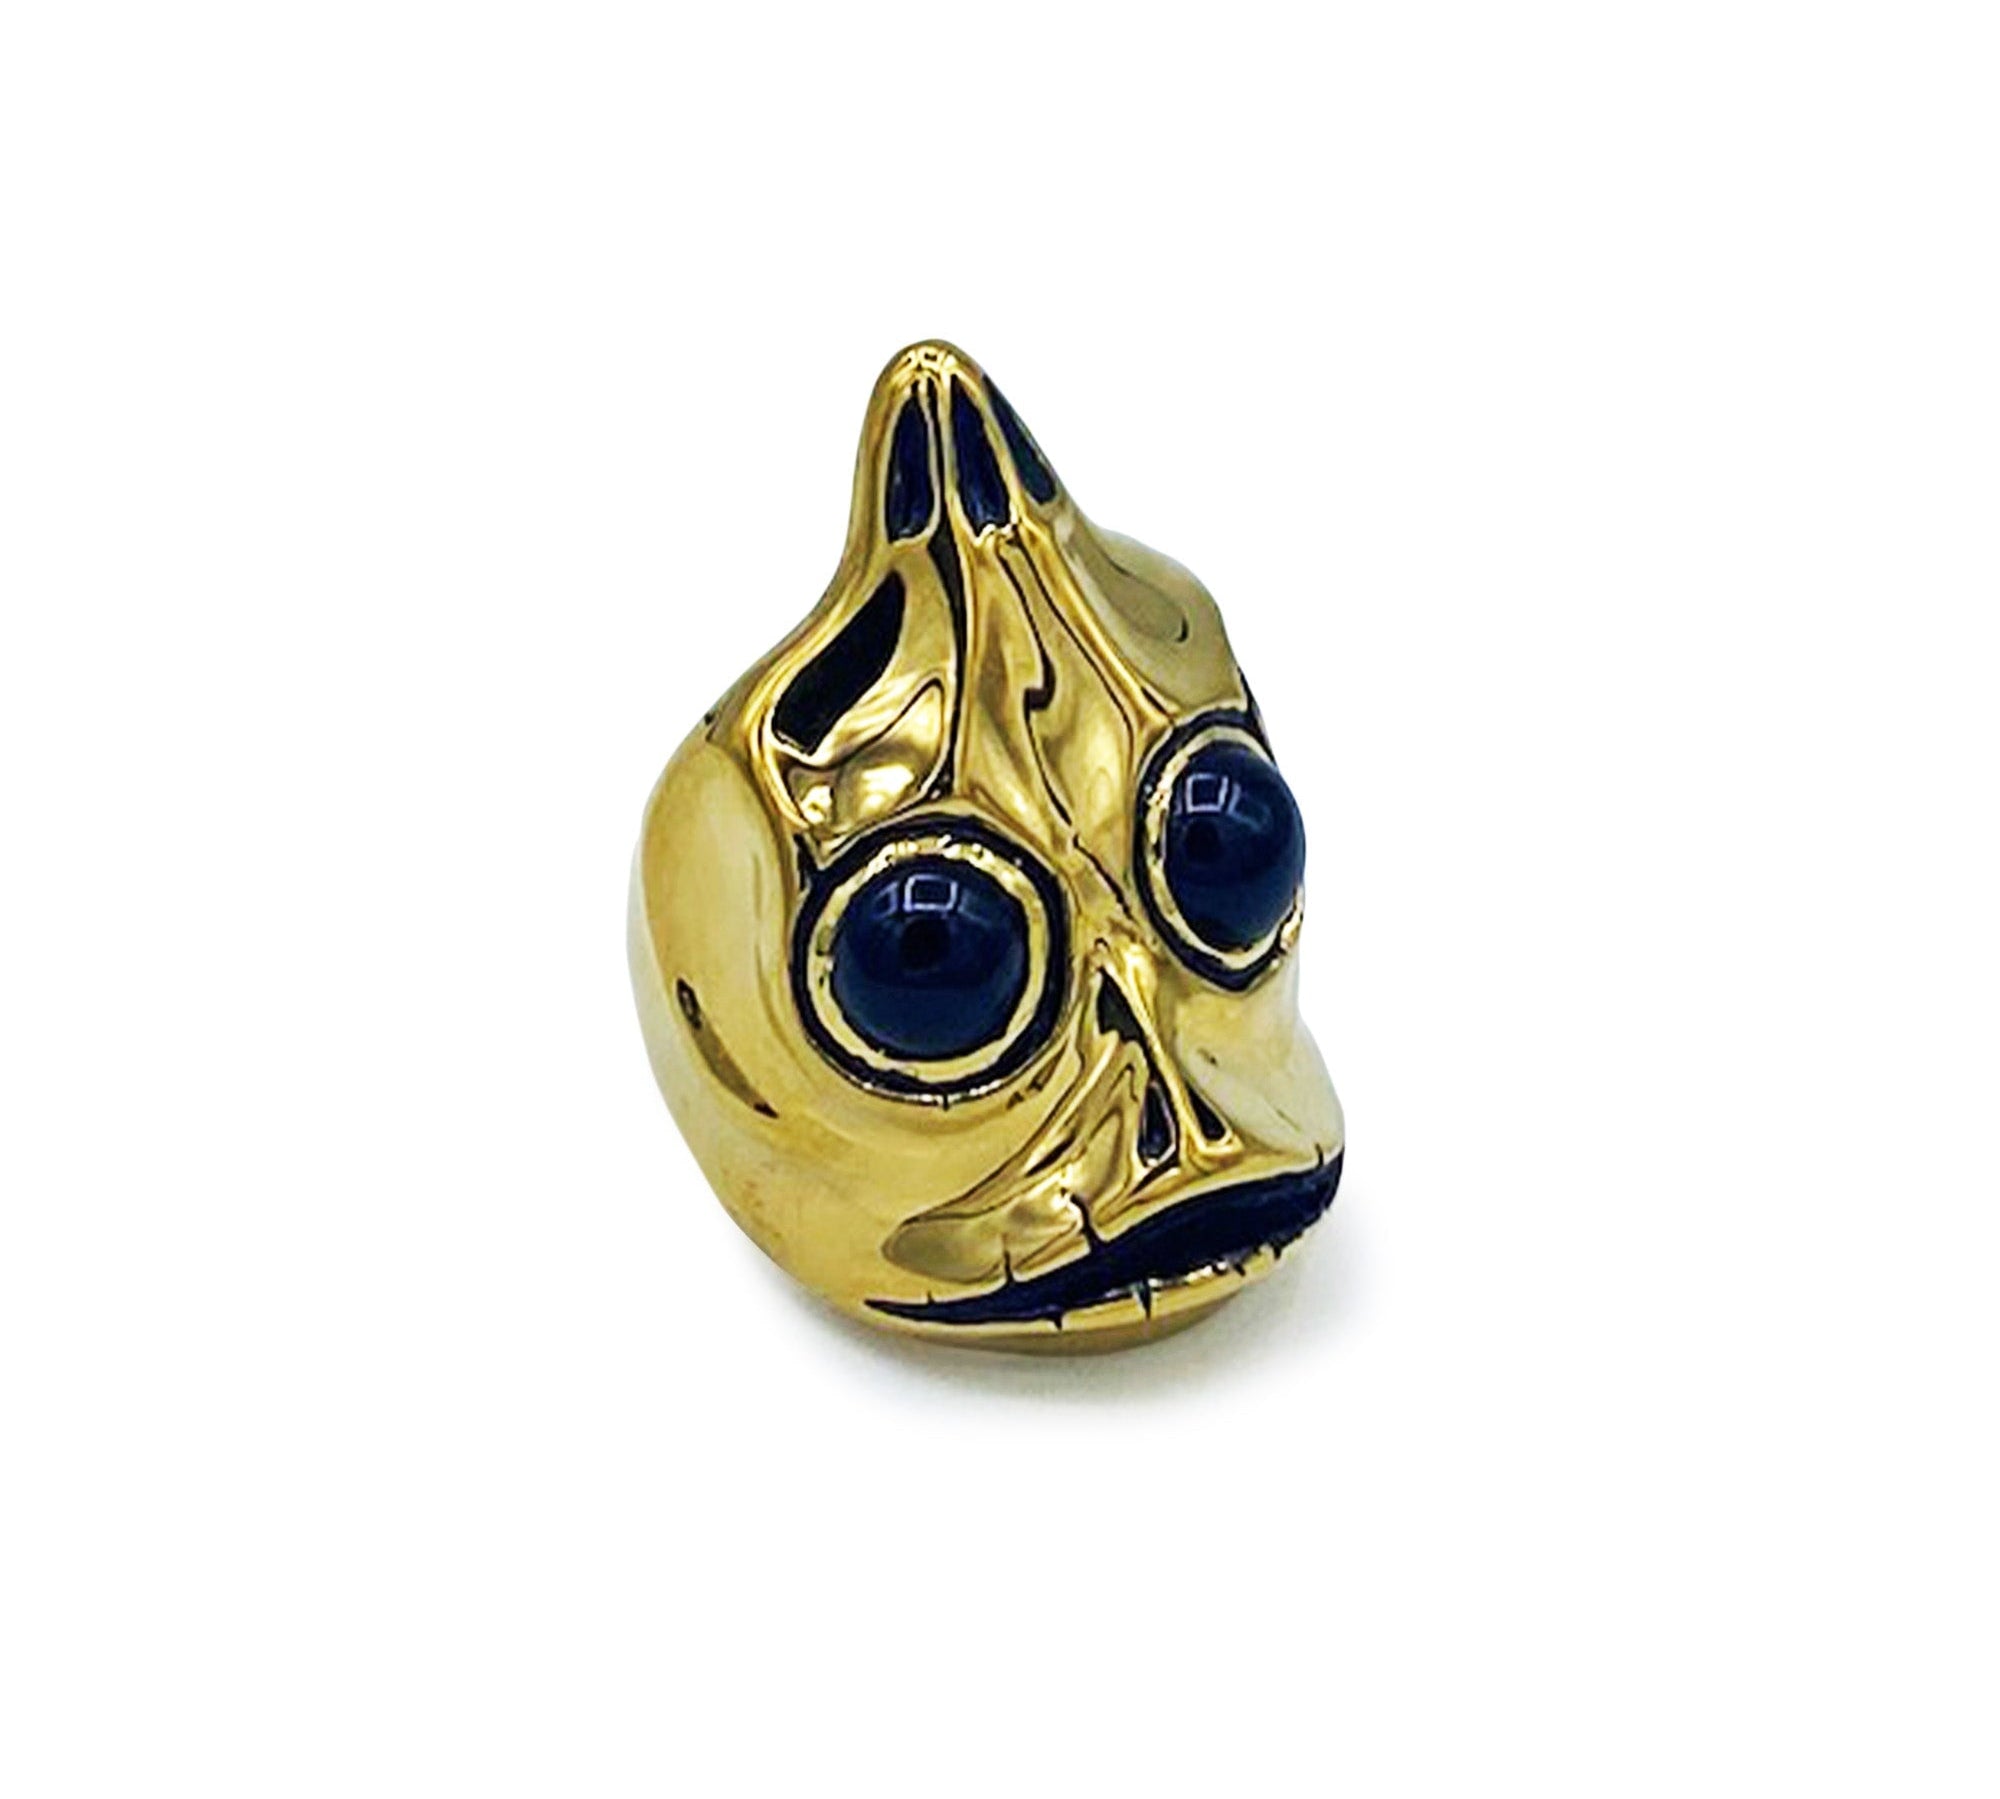 Sleezy Ring pm rings Precious Metals Vermeil - 24k Gold Plated 8 Black